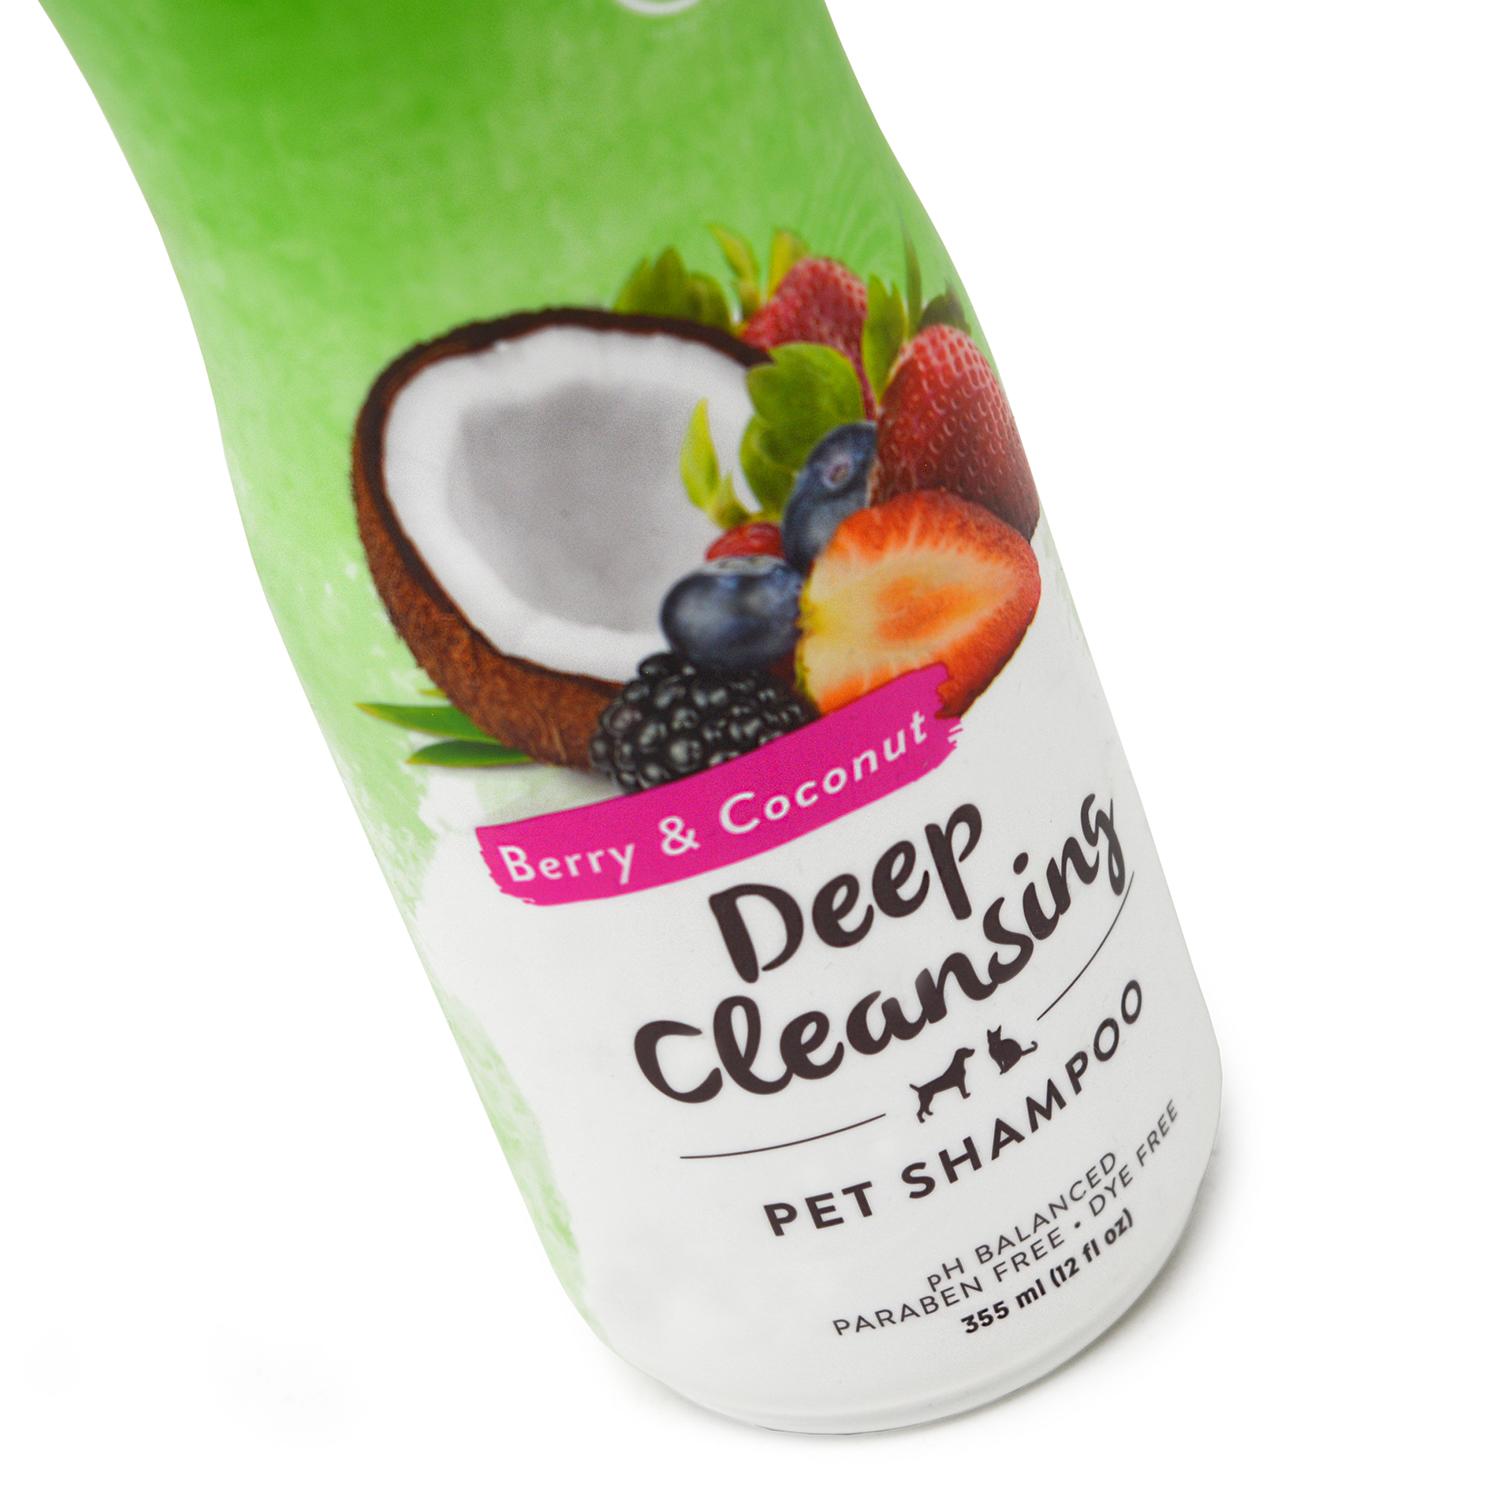 Close up of a bottle of Tropiclean Berry and Coconut Pet Shampoo